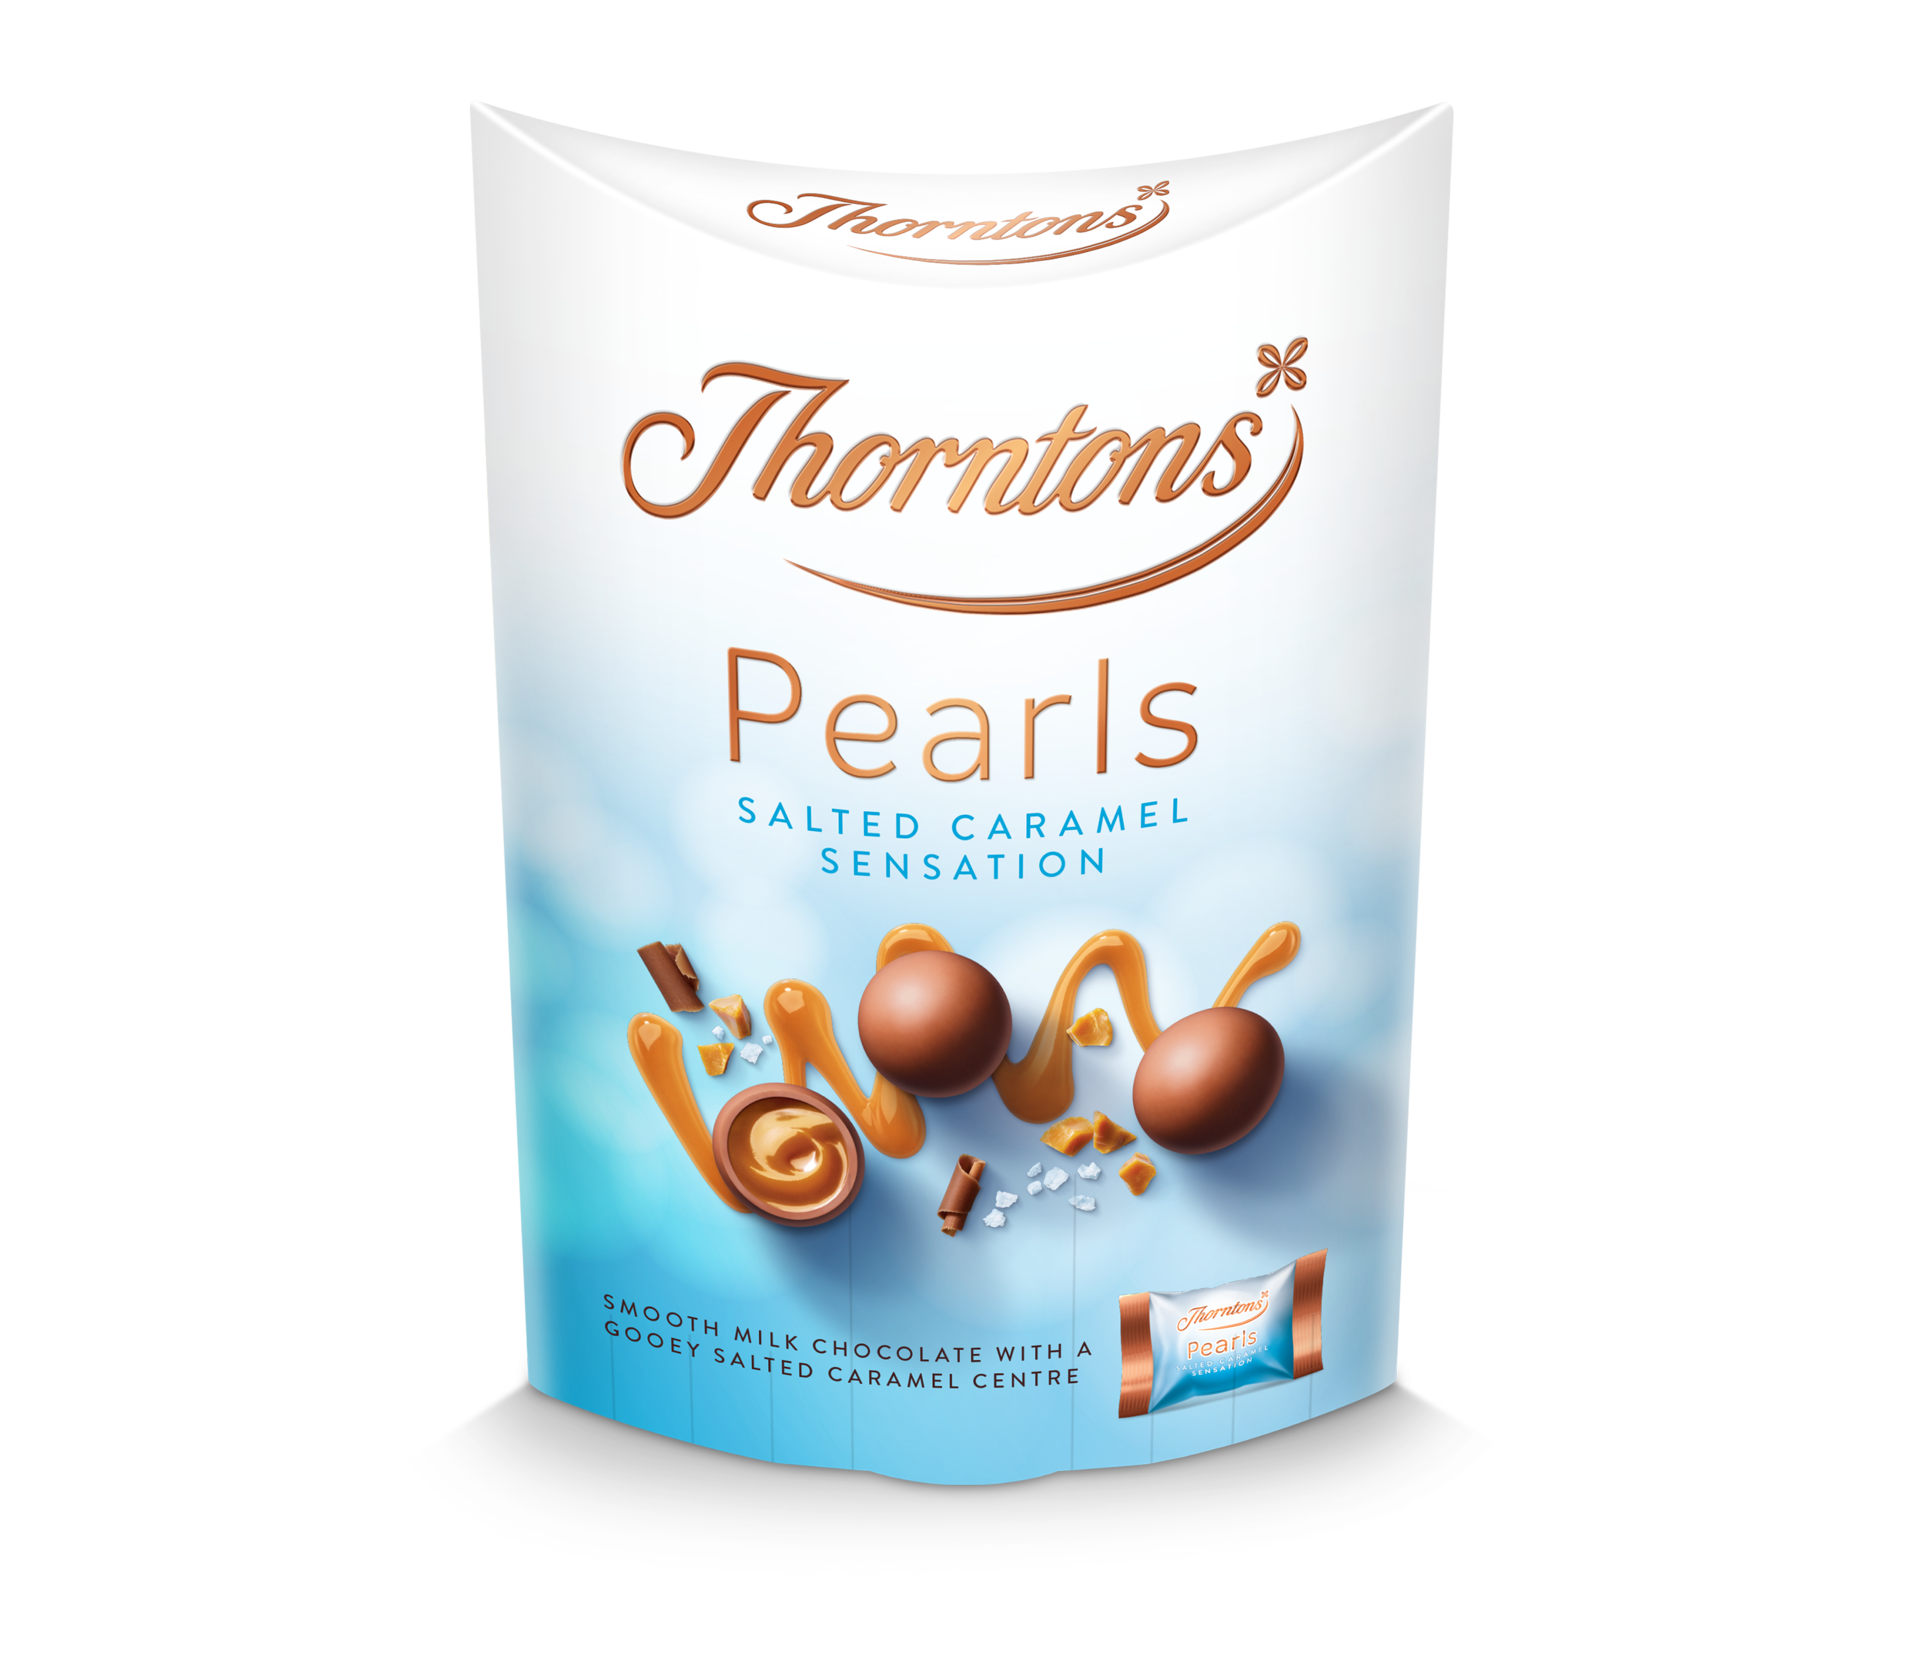 https://www.thorntons.com/medias/sys_master/images/haf/h73/8903680851998/77226875_main/77226875-main.png?resize=xs-s-xs